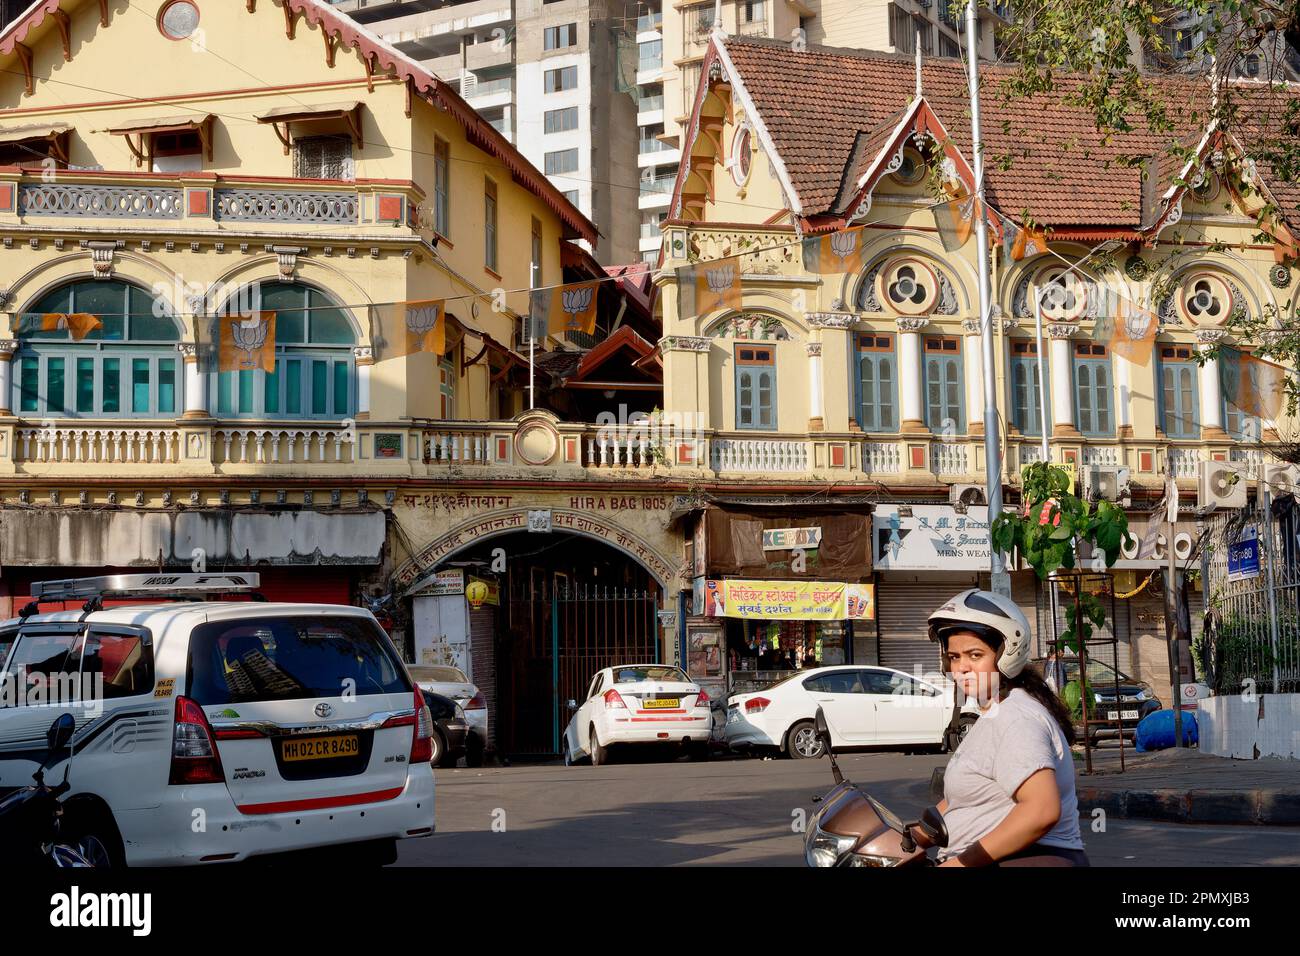 Traditional-style Hira Bag Building, built in 1905, with commercial and residential usage; C.P. Tank Road Circle, Bhuleshwar, Mumbai, India Stock Photo